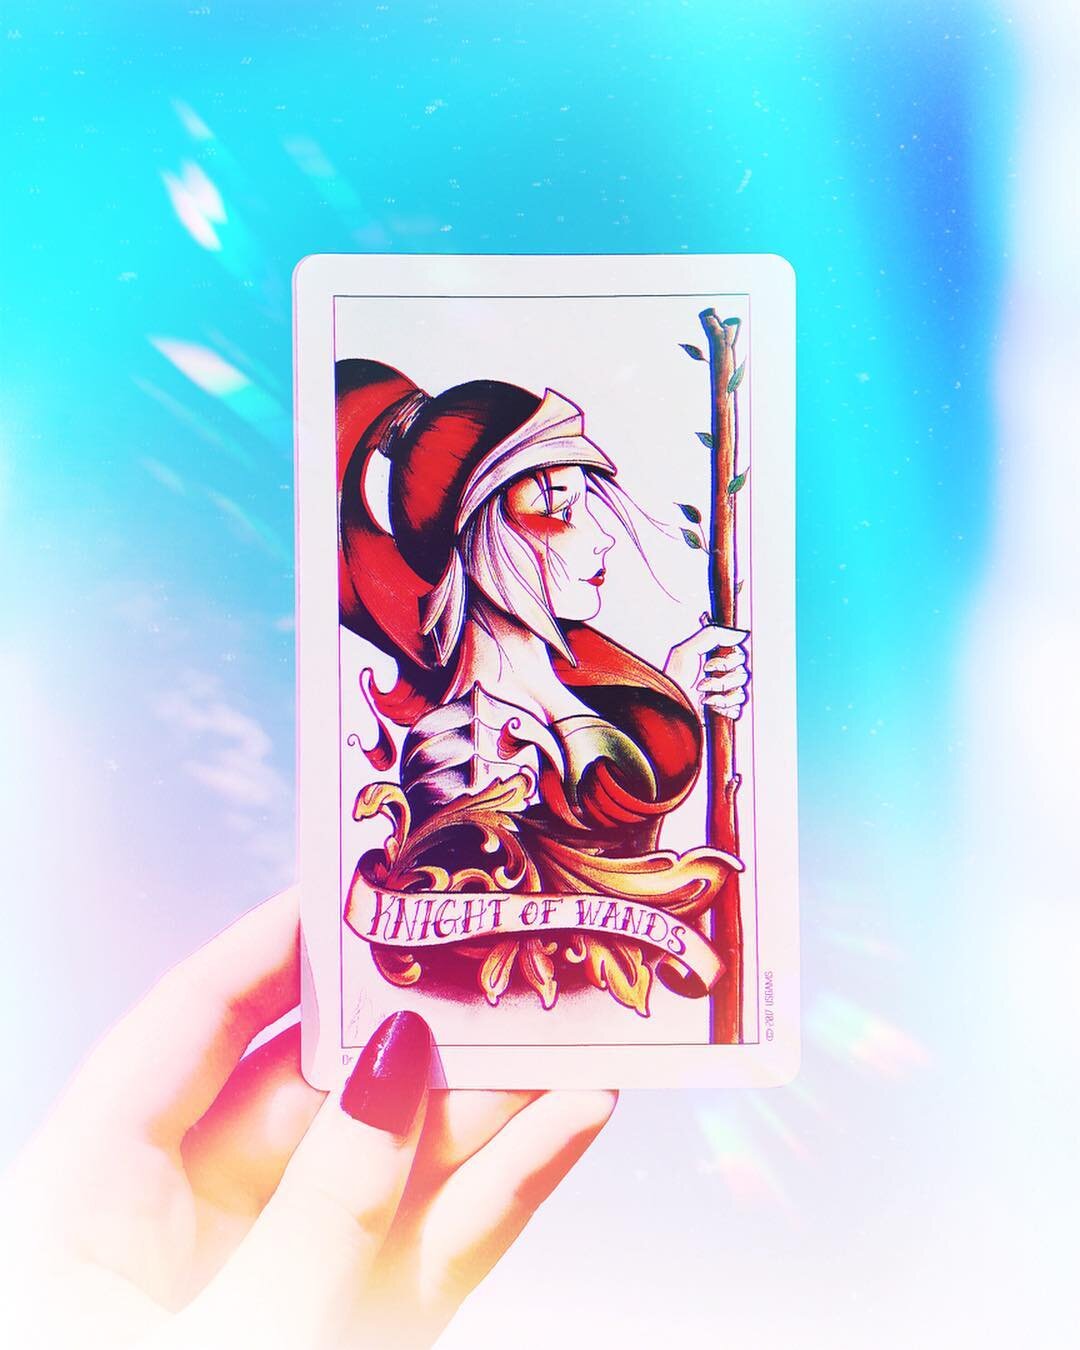 The Knight of Wands⁣⁣
⁣
This card calls for taking action. The fiery knight has an expression of enthusiastic determination on her face, her body straight and tall, confident in her abilities.⁣⁣
⁣
She encourages you to pursue your creative ideas with